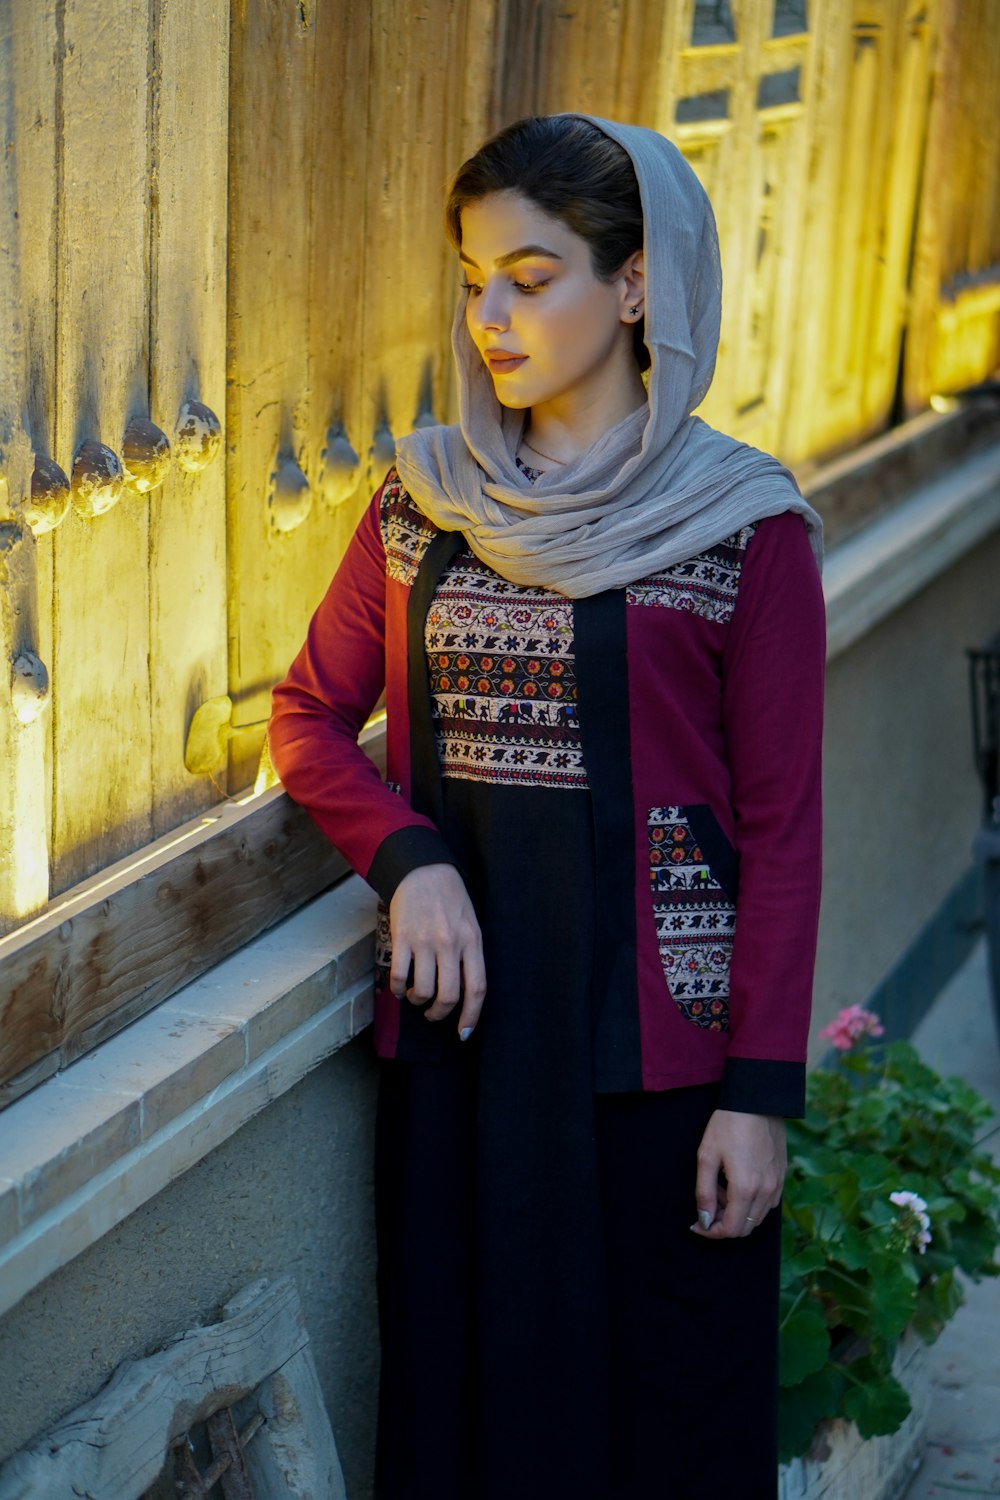 woman in red long sleeve dress wearing brown hijab standing beside yellow wooden door during daytime